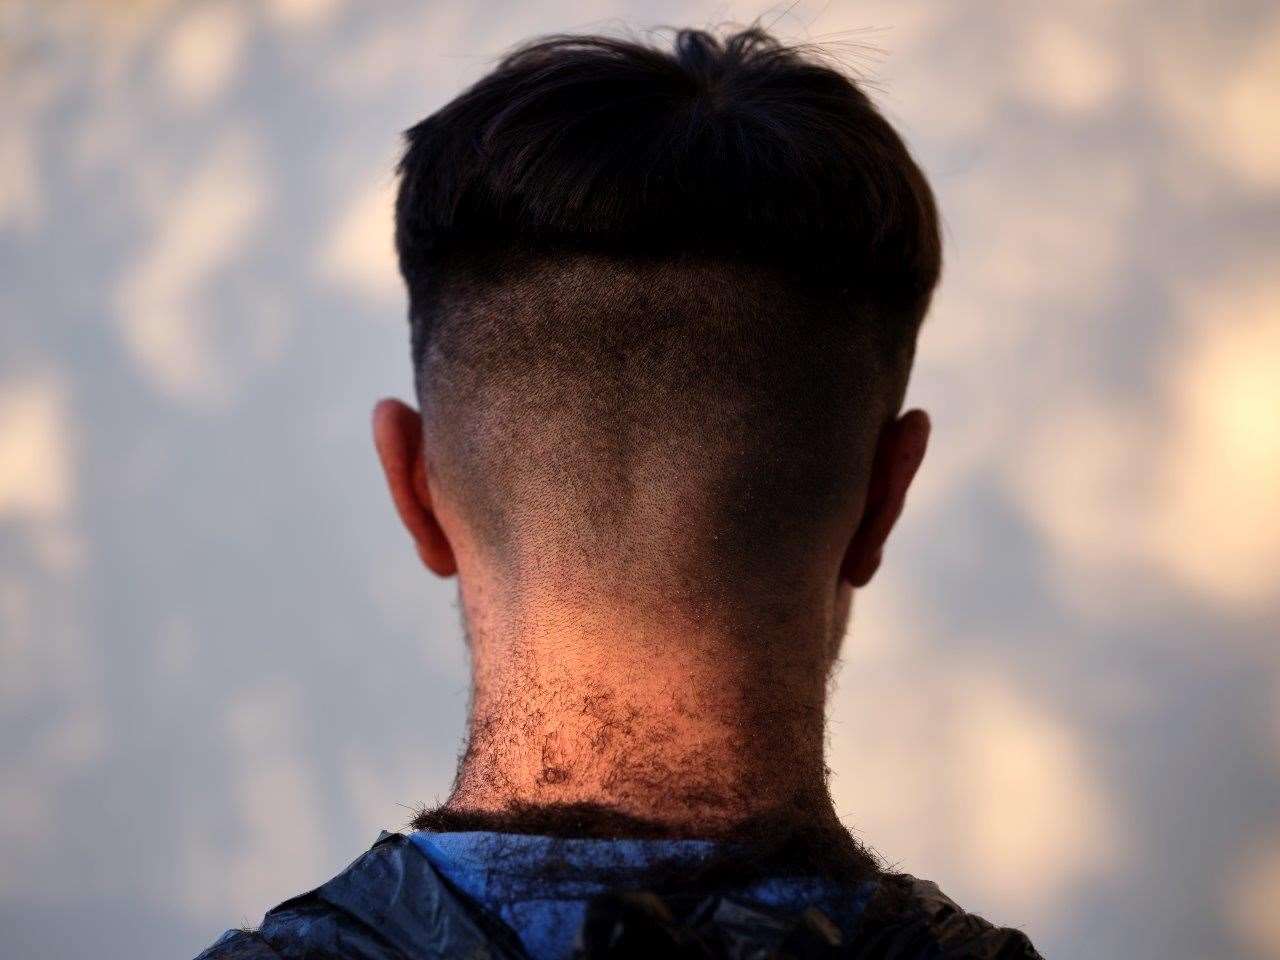 Joshua Chhabra’s skin fade, a haircut given to him by his older brother Matthew, taken by commissioned artist Anand Chhabra in Wolverhampton (Anand Chhabra/Historic England/PA)